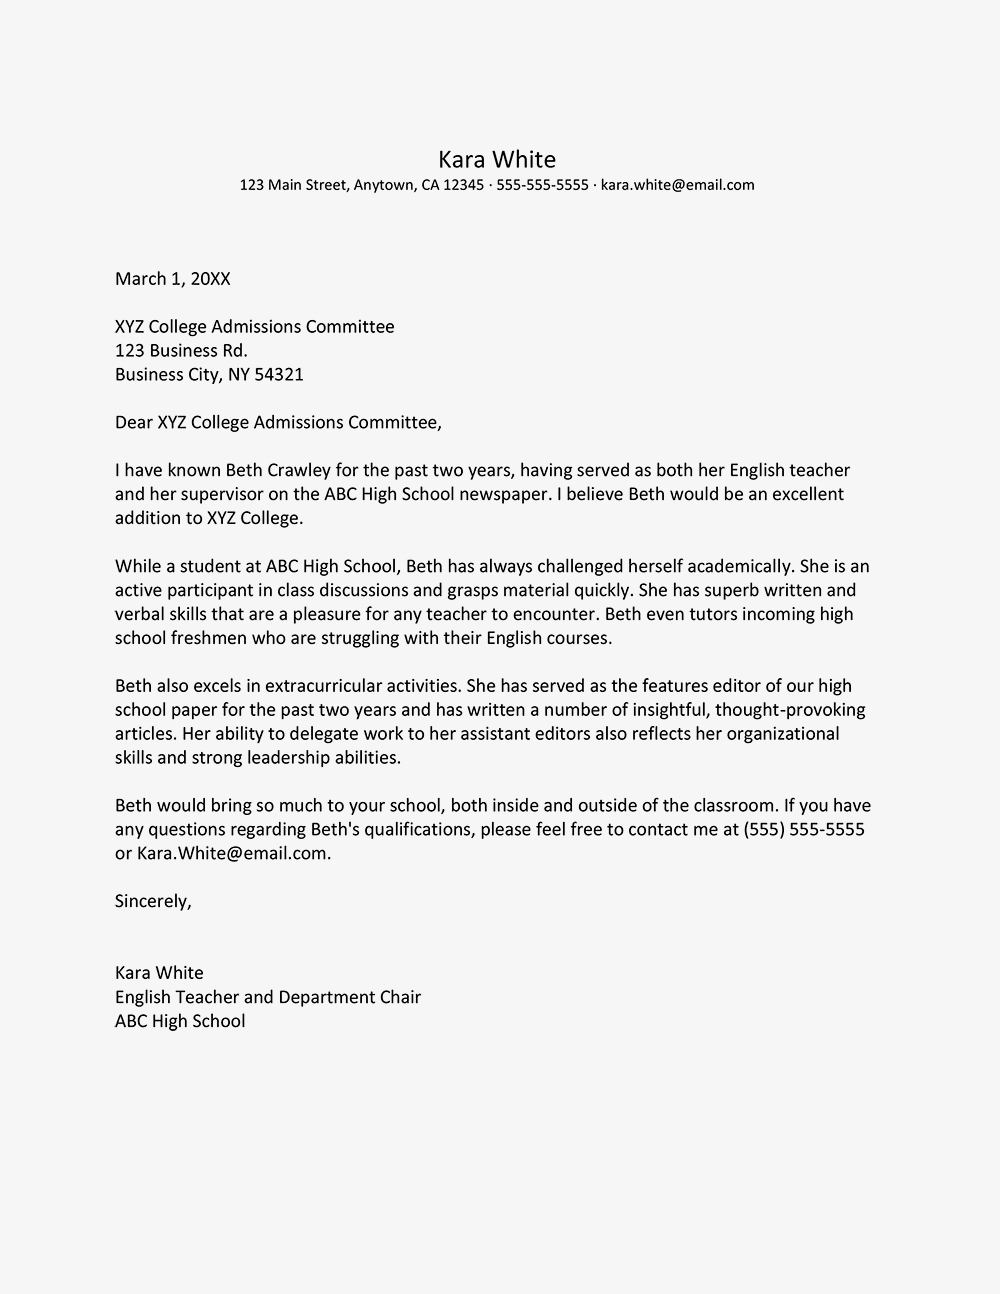 Recommendation Letter From Employer To University Akali inside measurements 1000 X 1294